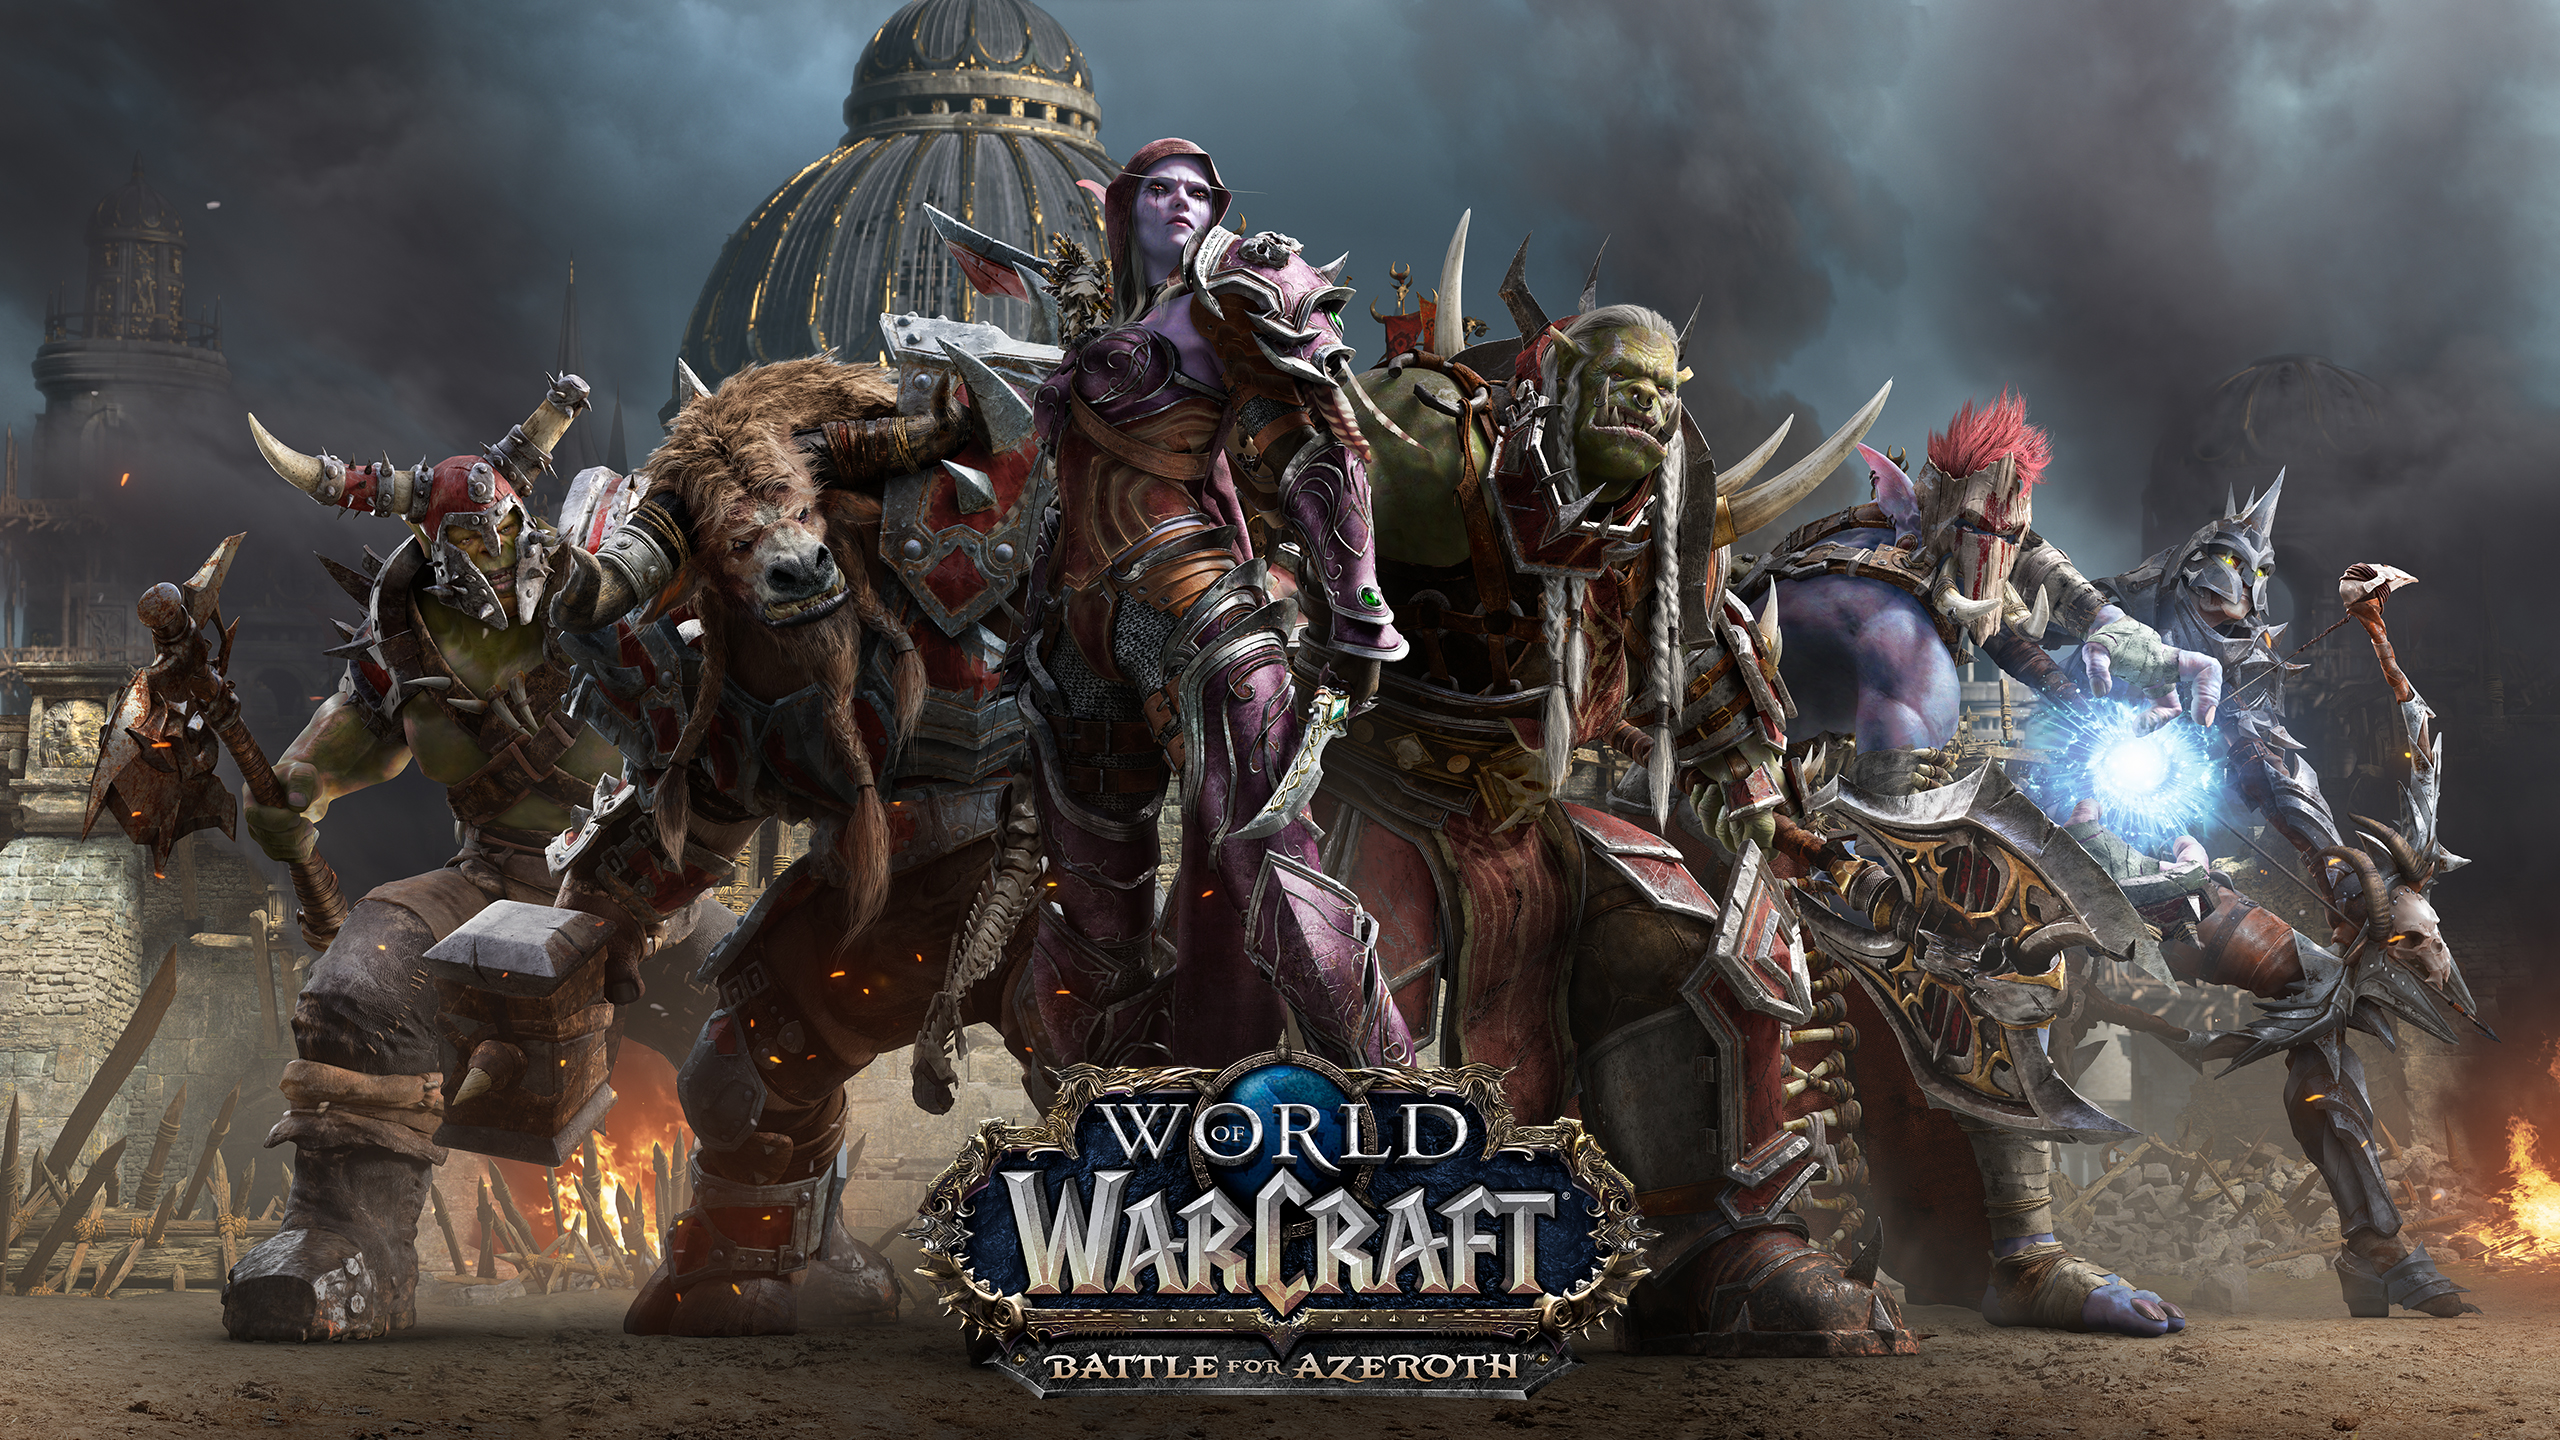 Battle for Azeroth Release Date